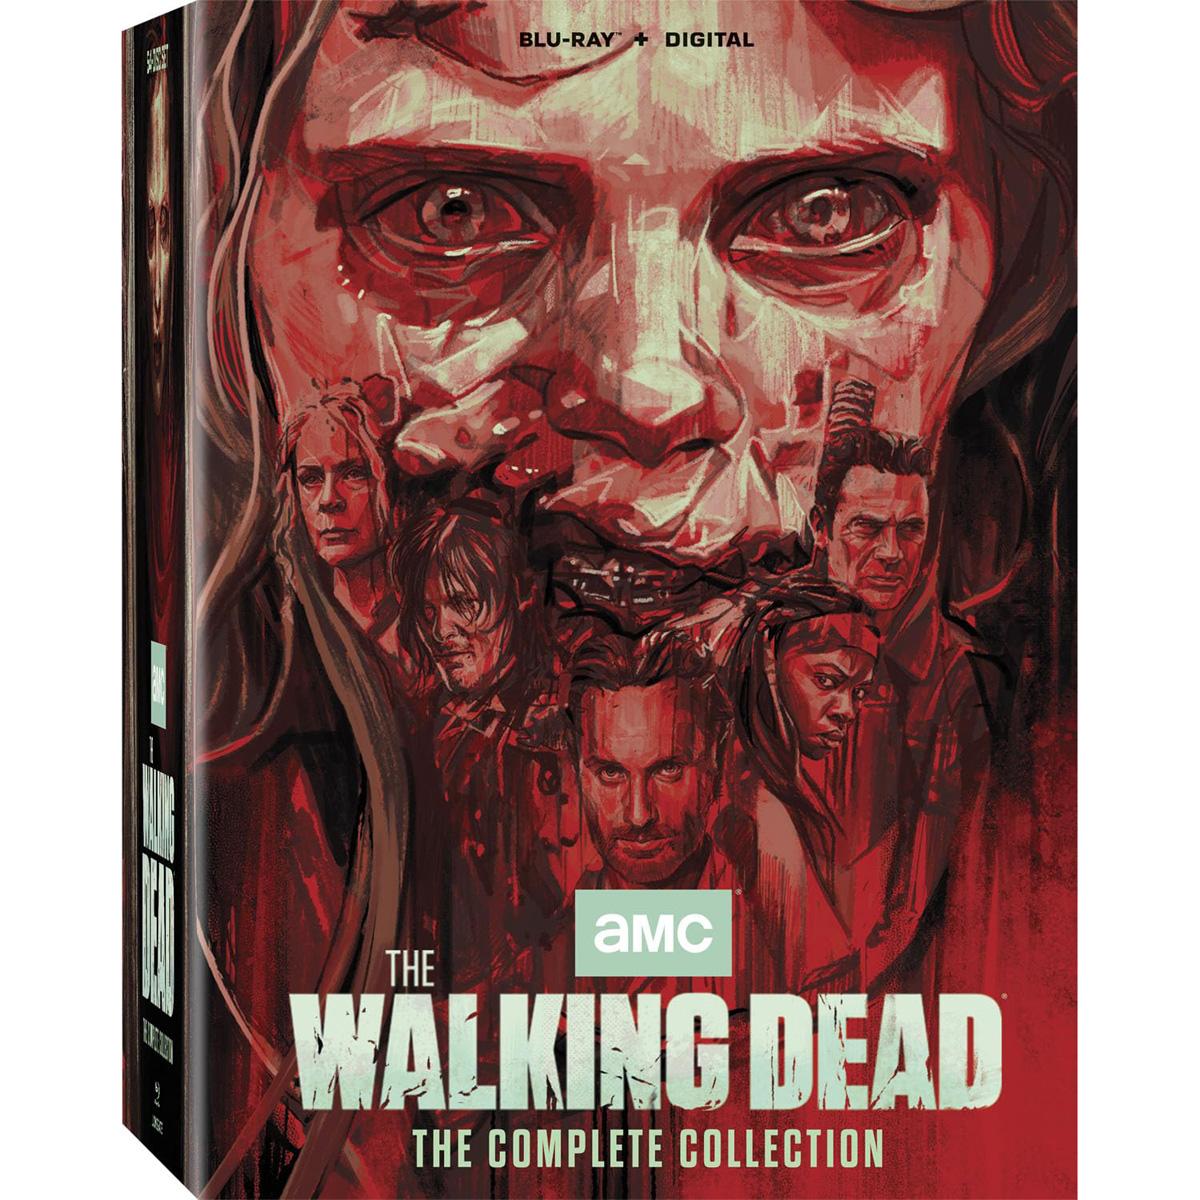 The Walking Dead Complete Series Blu-ray for $109.99 Shipped